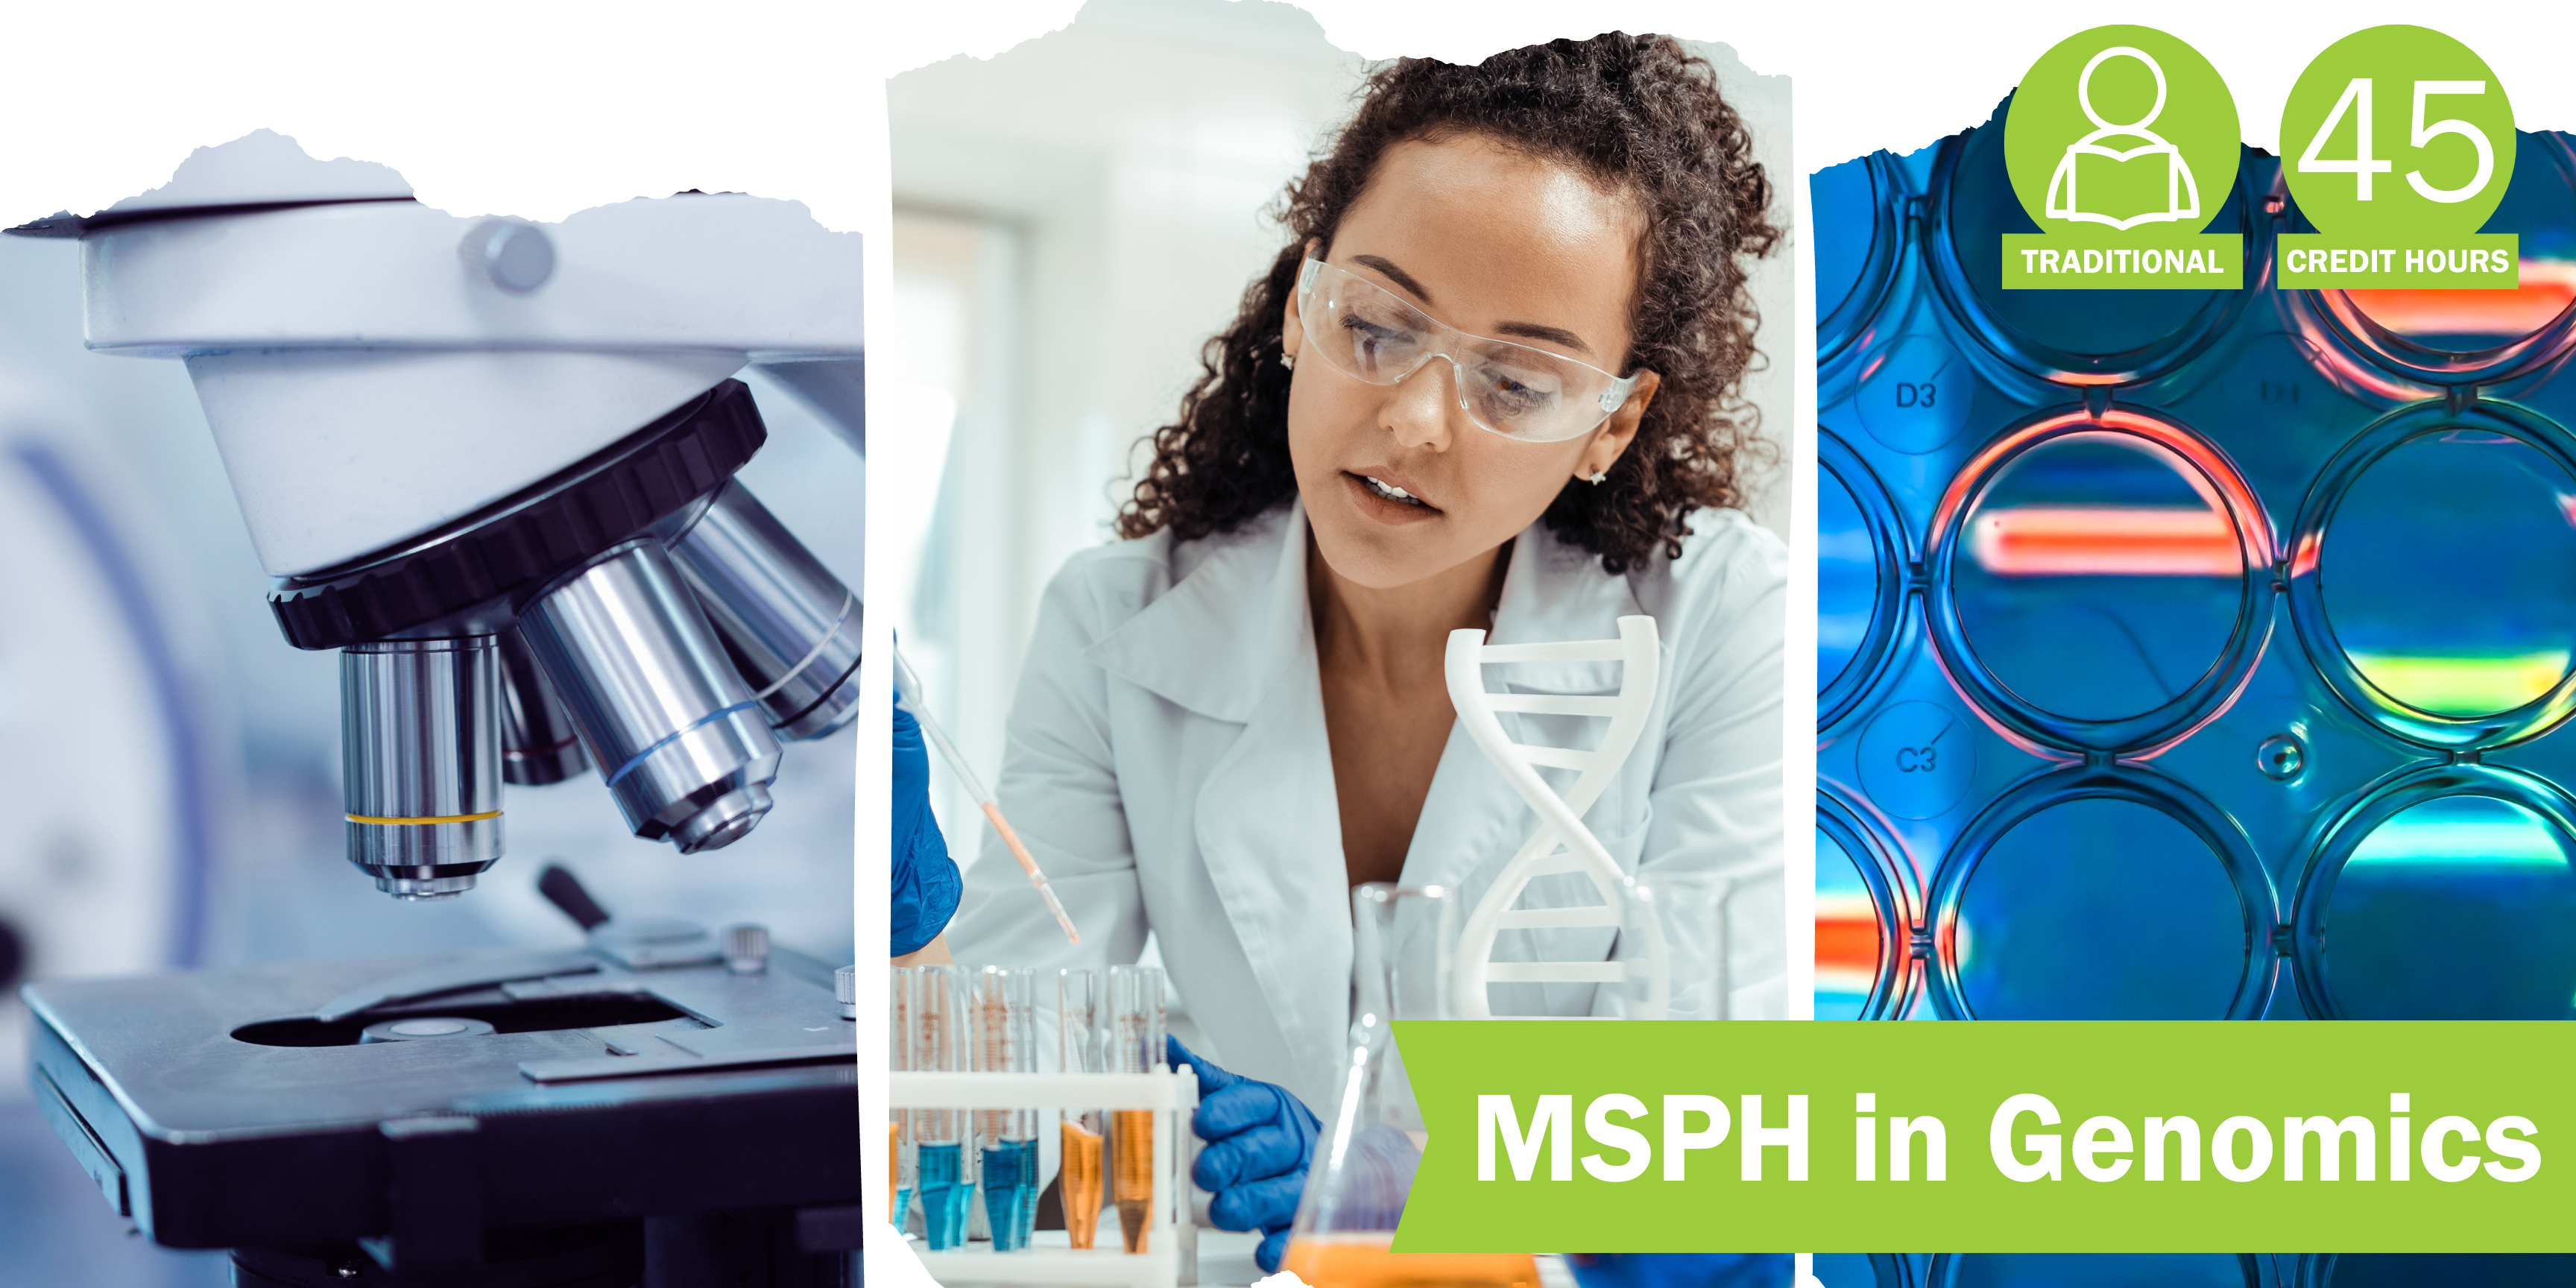 MSPH in Genomics - 45 credit hours, traditional course format